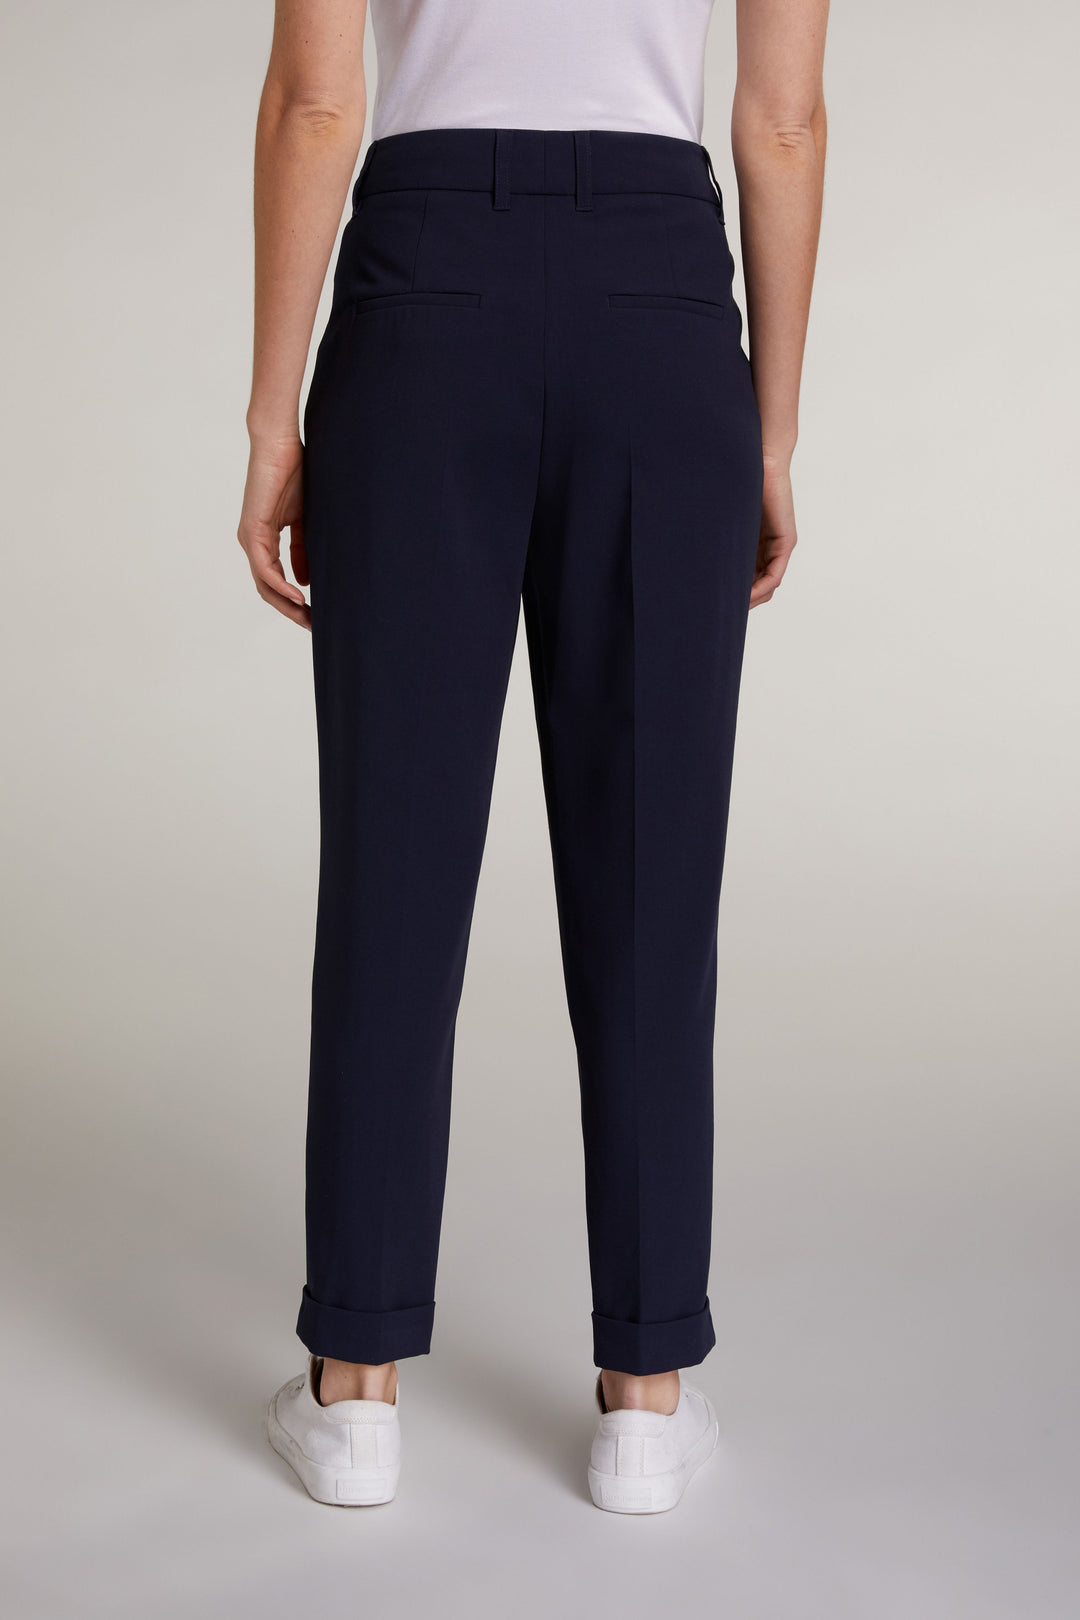 Oui 72712 Navy Trousers Back | Dotique